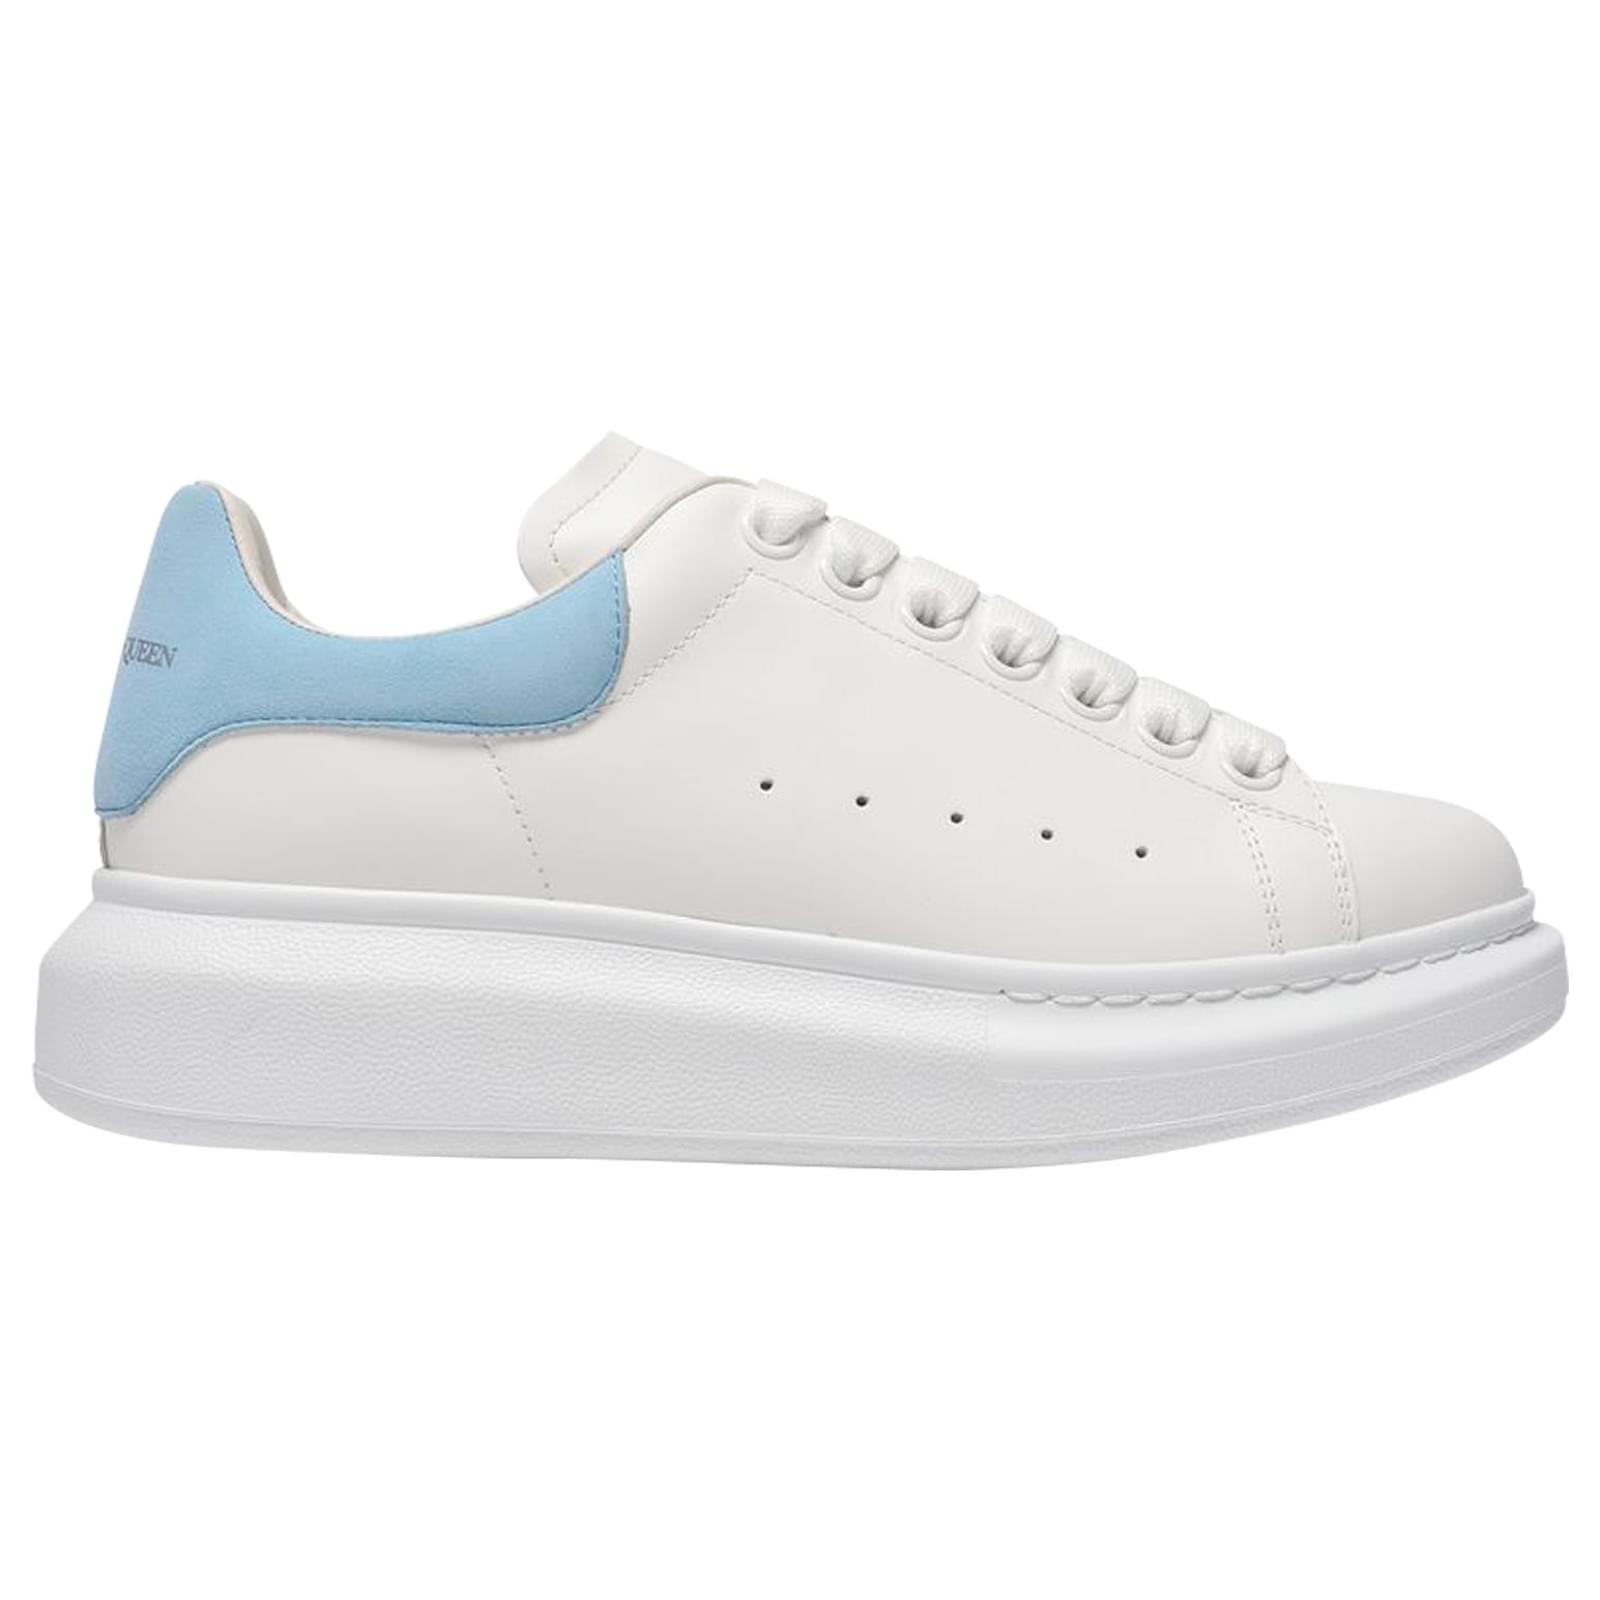 Oversized Sneakers - Alexander Mcqueen - White/Powder Blue - Leather ...